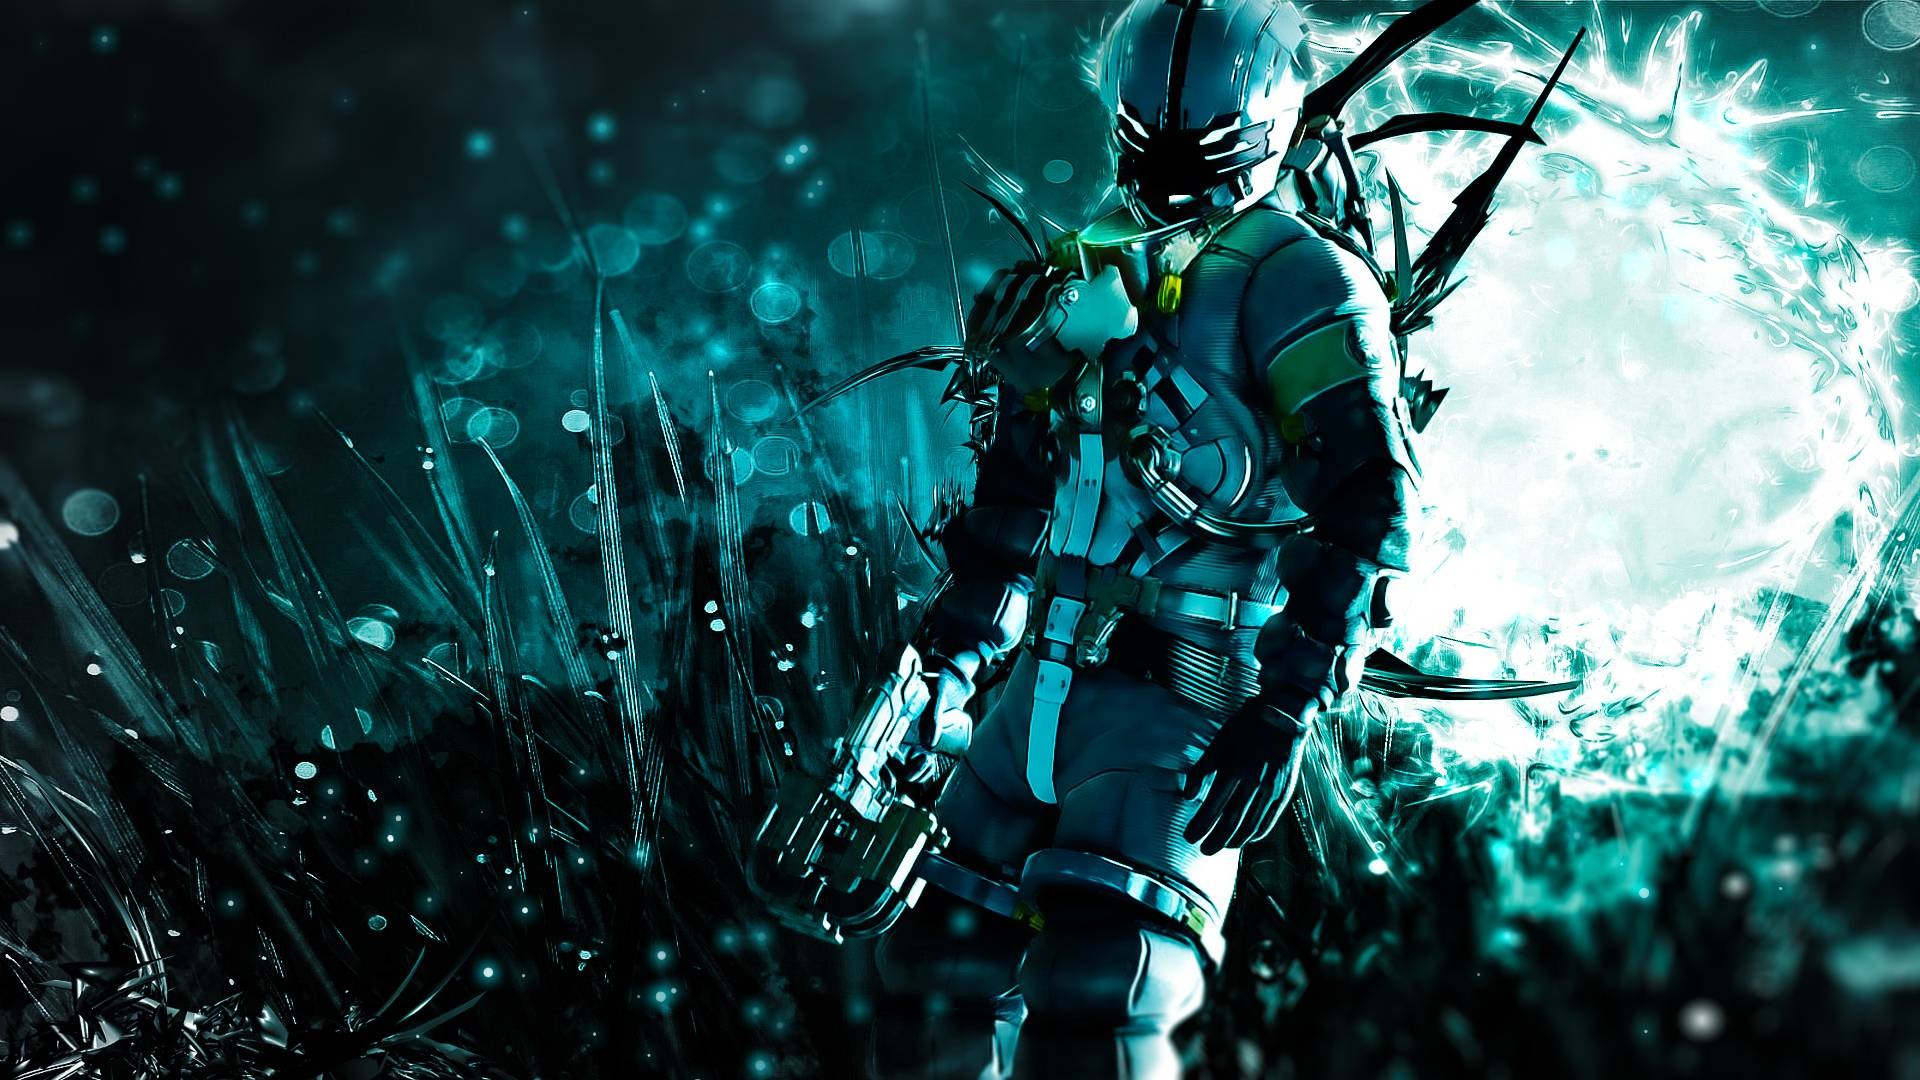 dead space wallpaper hd,green,pc game,soldier,games,personal protective equipment